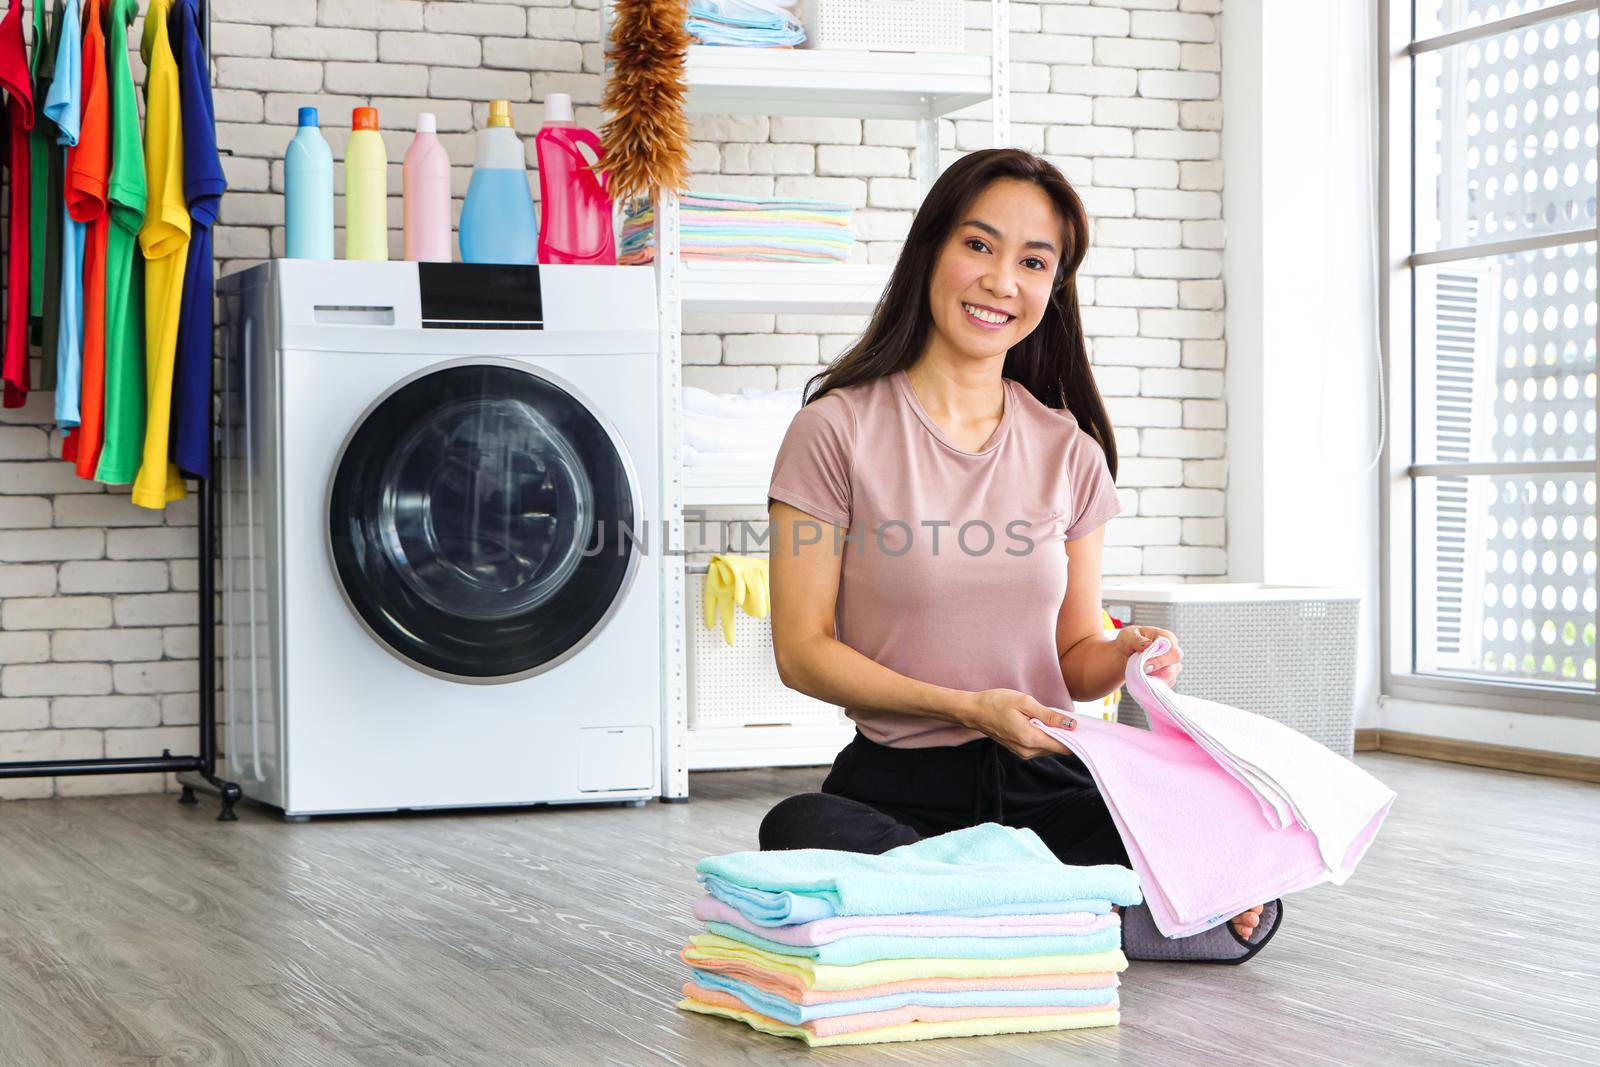 woman doing a housework holding laundry
 by atitaph